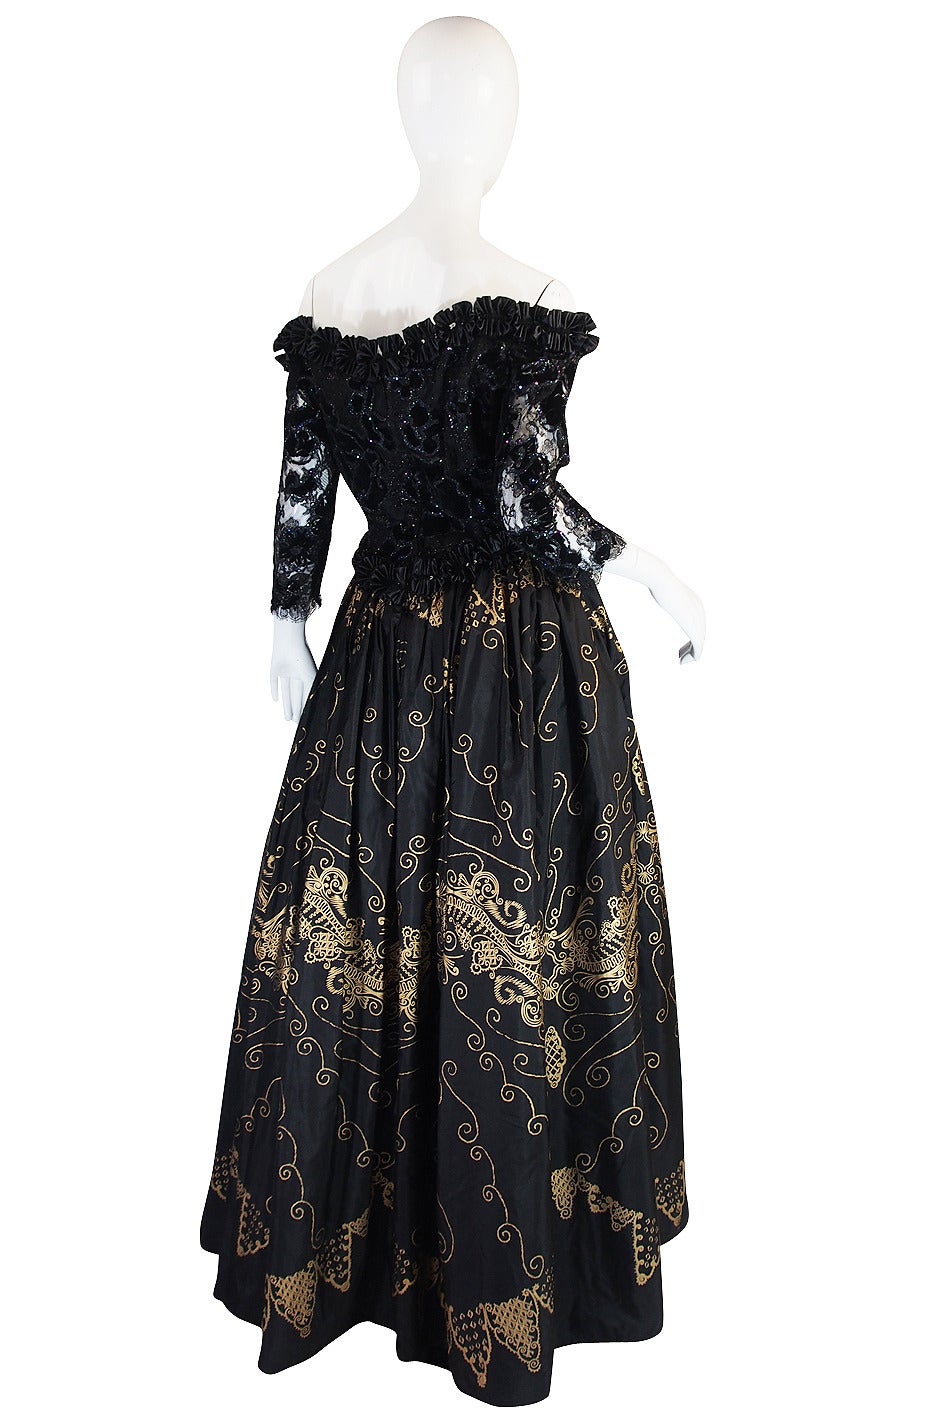 This stunning and dramatic black and gold, hand painted gown by Zandra Rhodes is deliciously decadent in every way. The bodice is made of a  silk with a velvet fused floral pattern highlighted with glitter. The sleeves take this a step further with